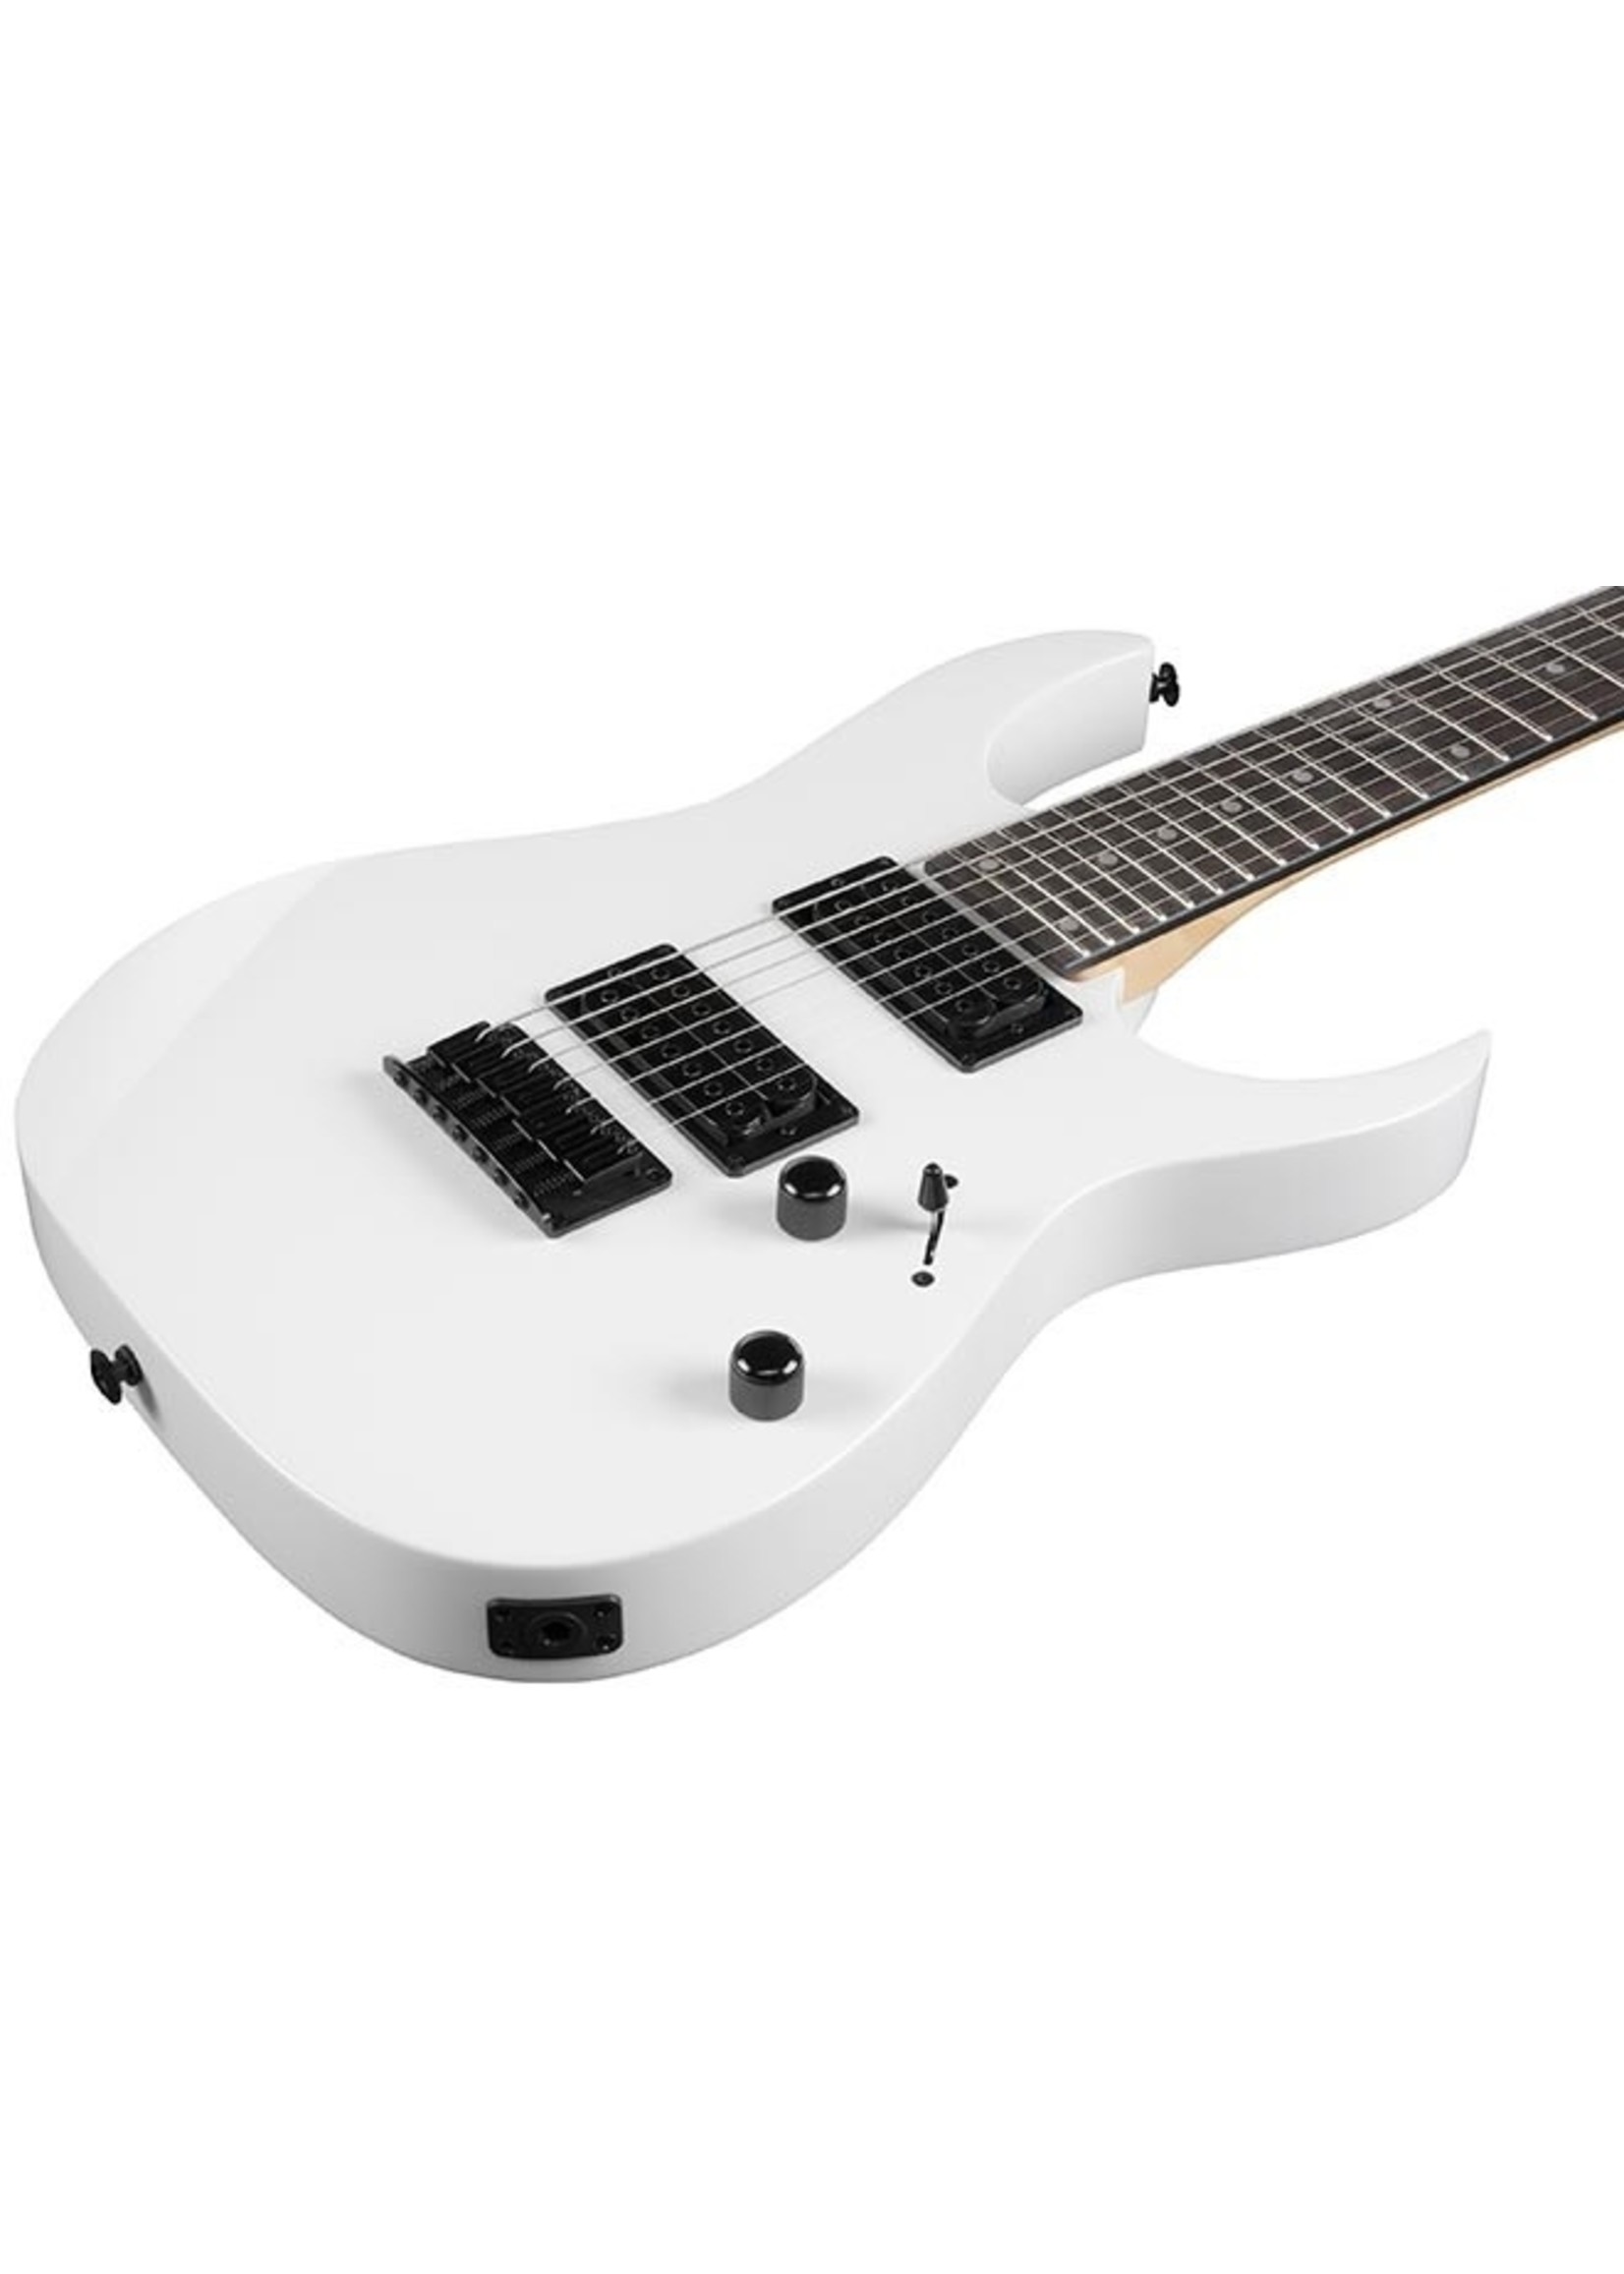 IBANEZ Ibanez GRG7221WH Solid Body 7 String RH Electric Guitar - White grg-7221-wh